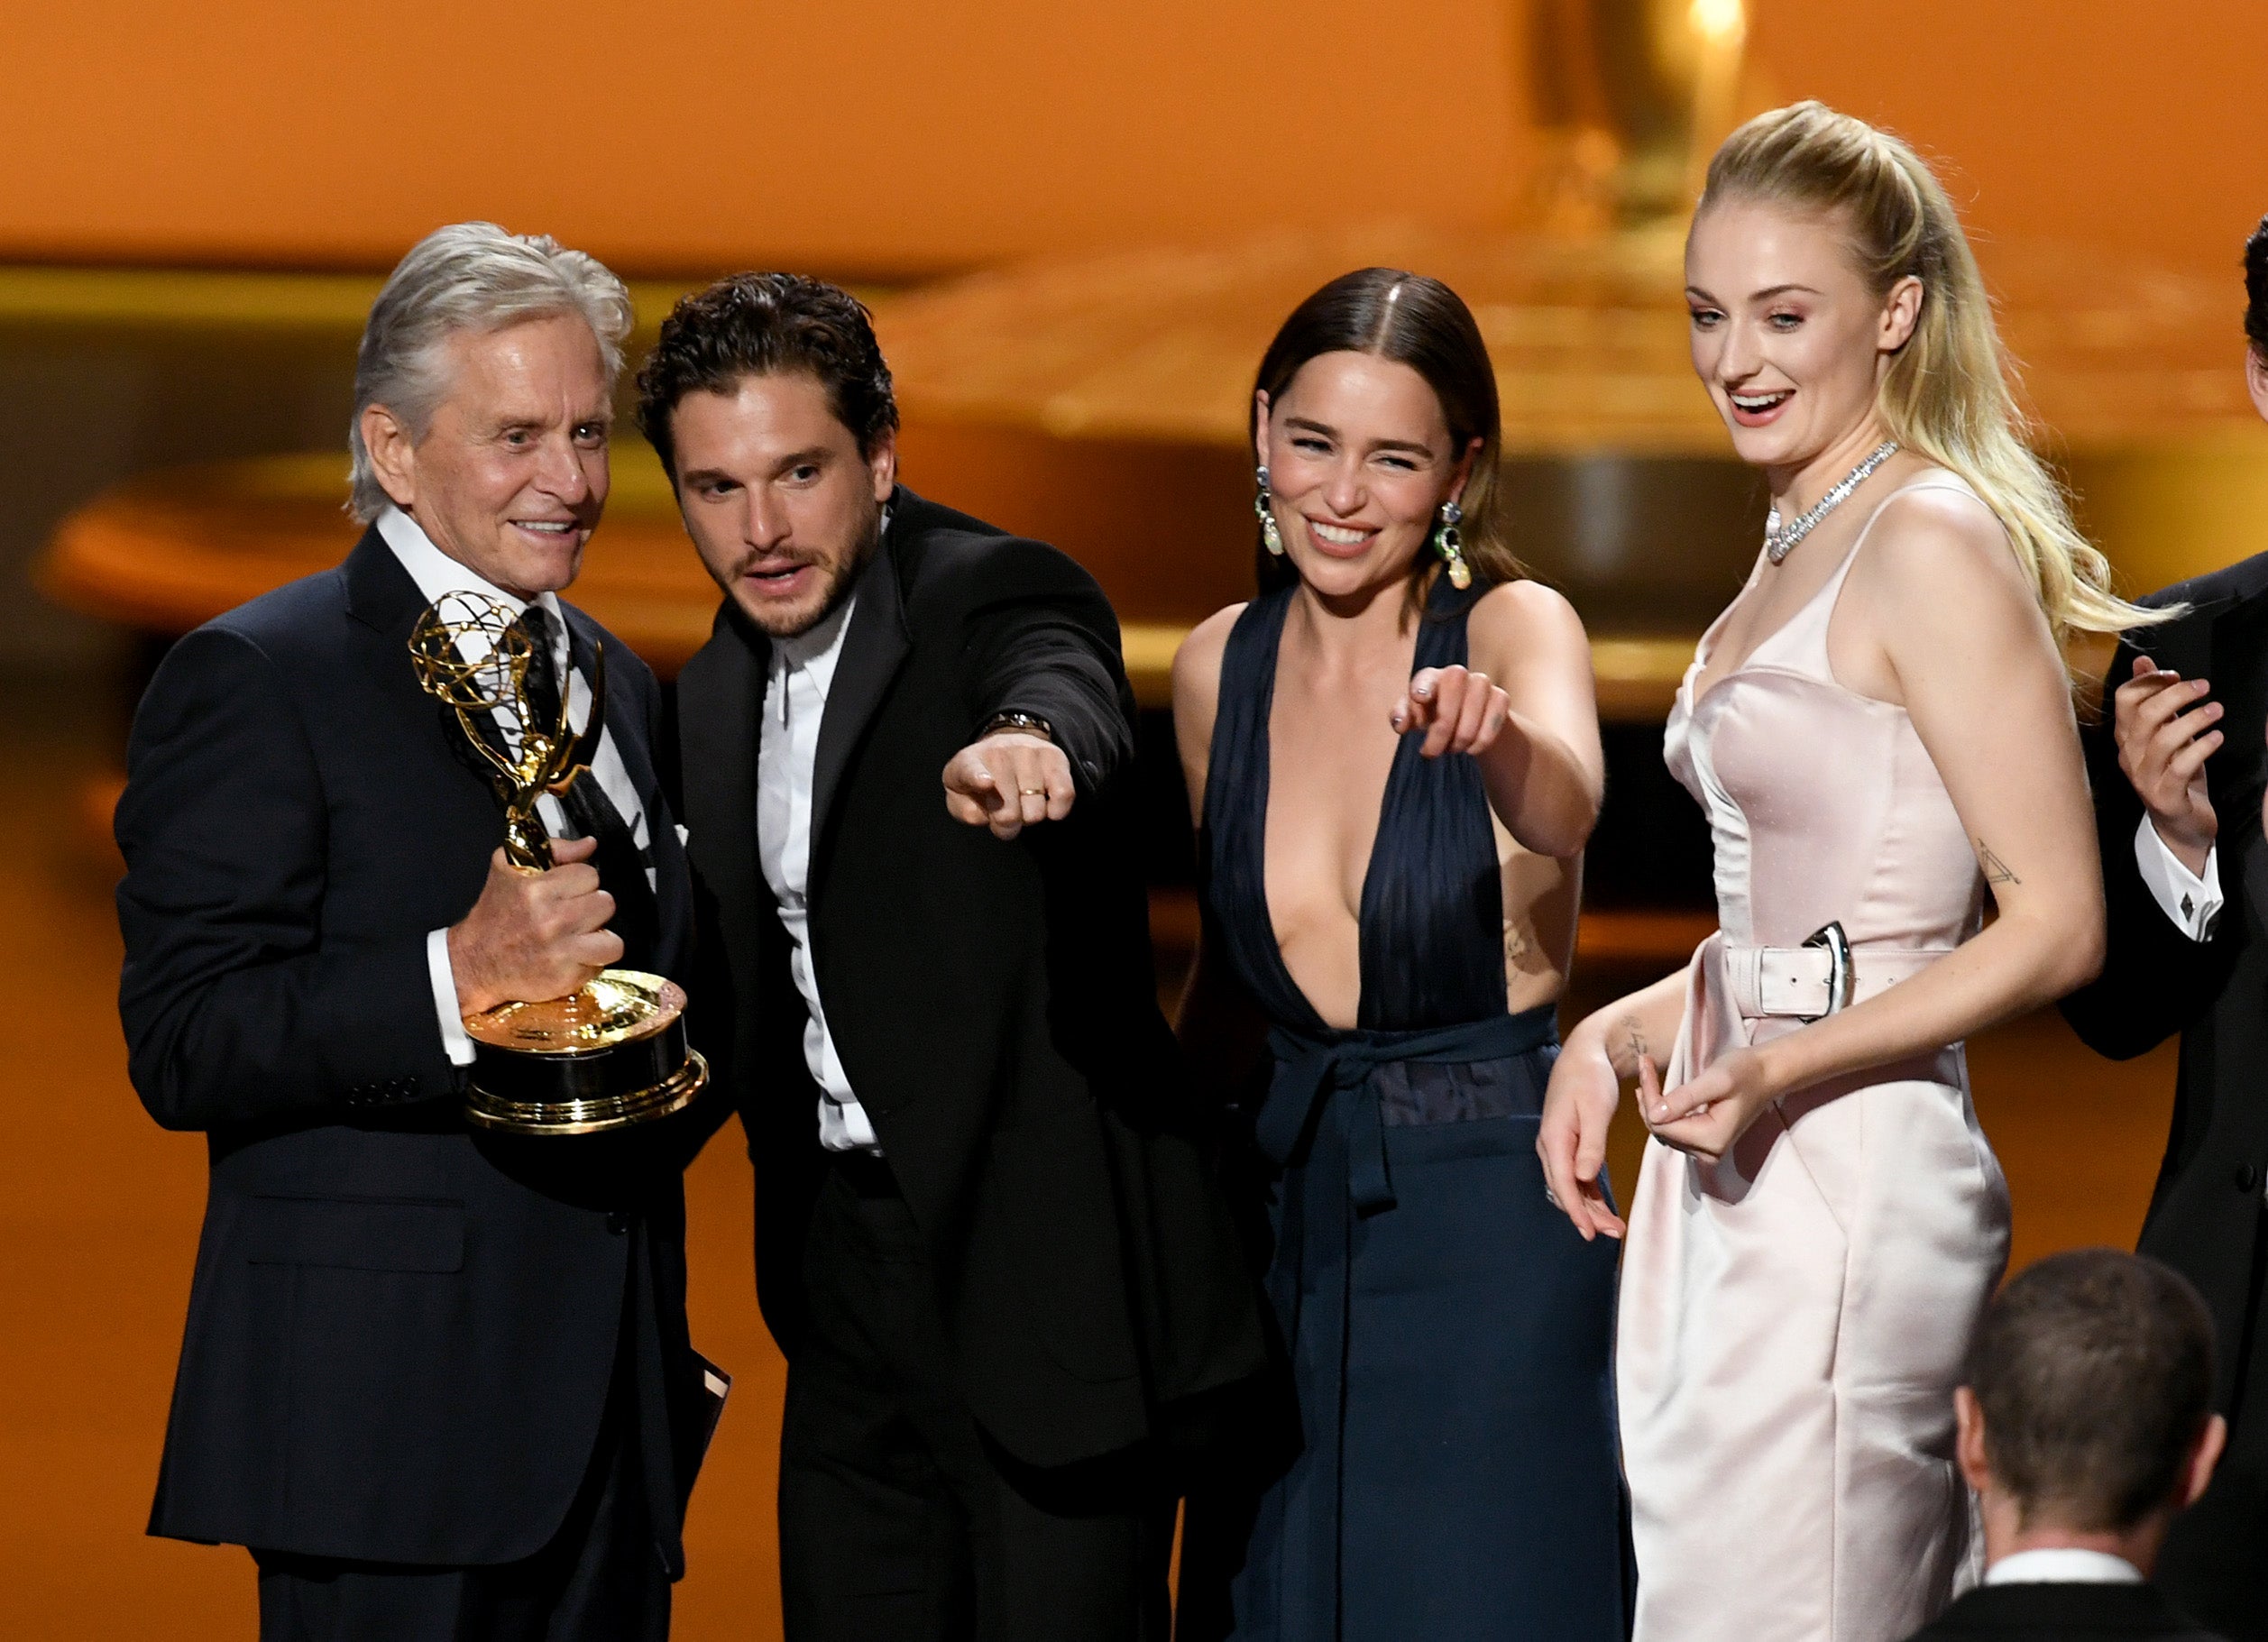 Game of Thrones' Cast Reunites Onstage to Present at 2019 Emmys